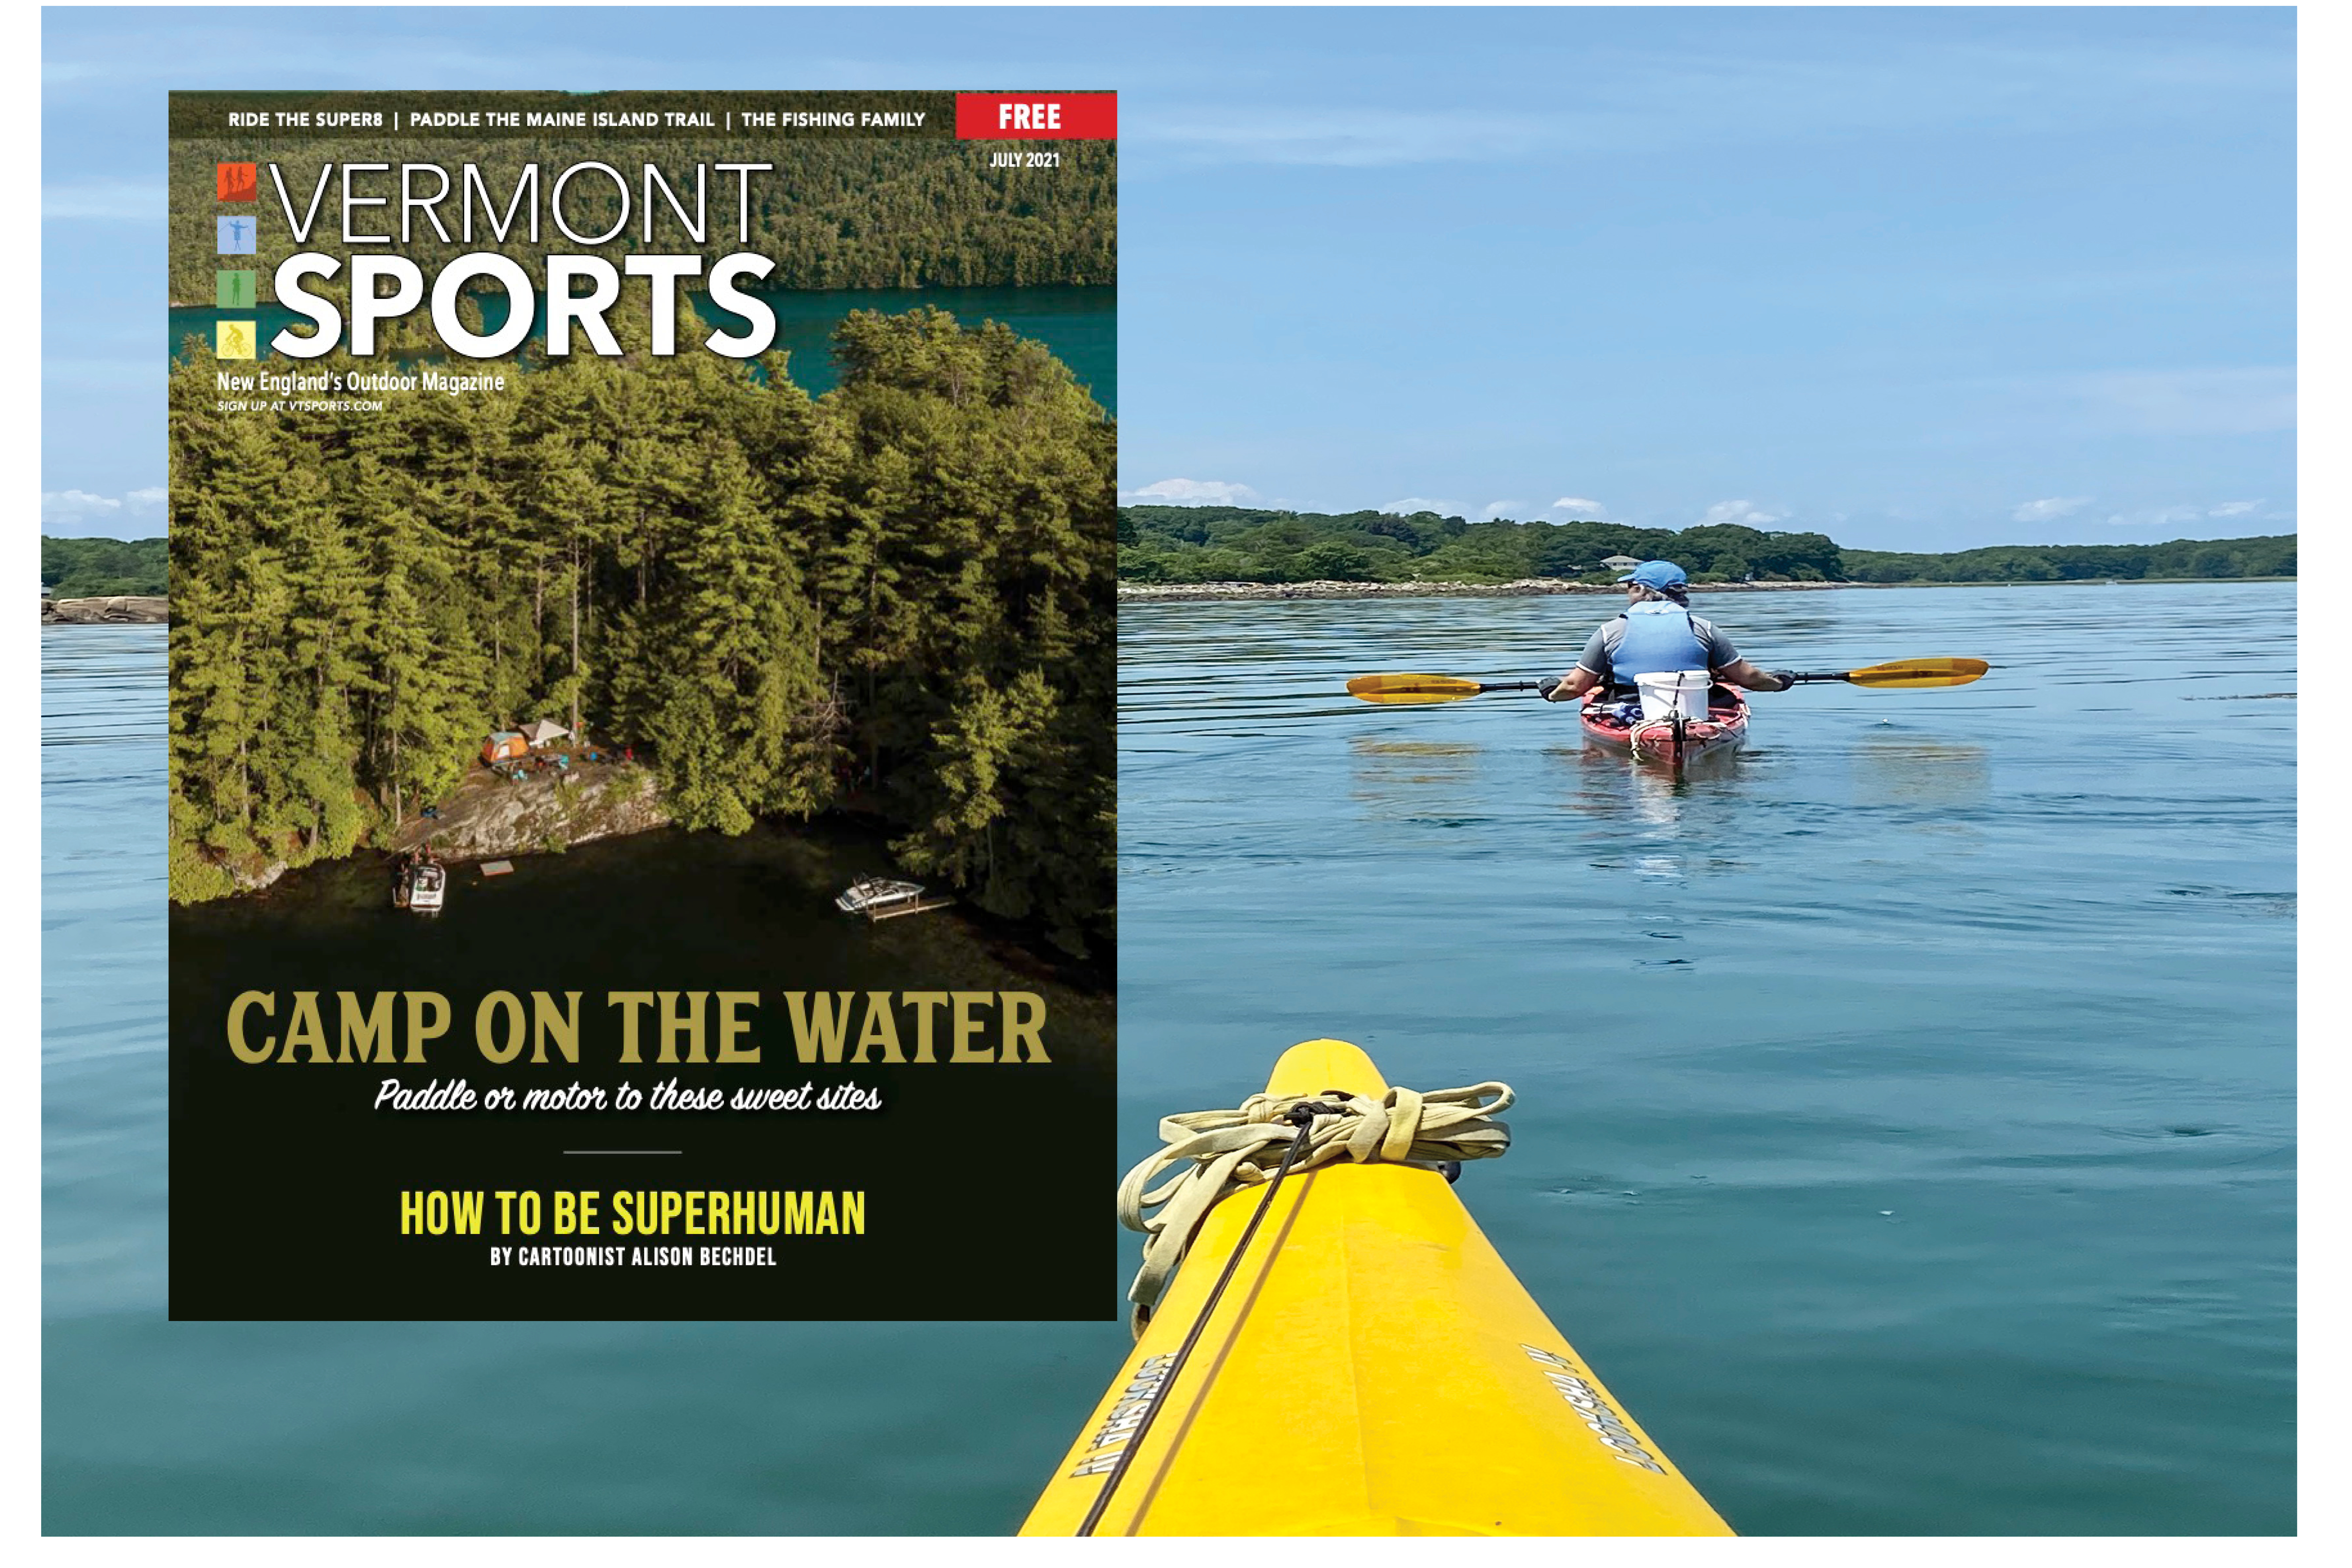 Vermont Sports July 2021 Issue